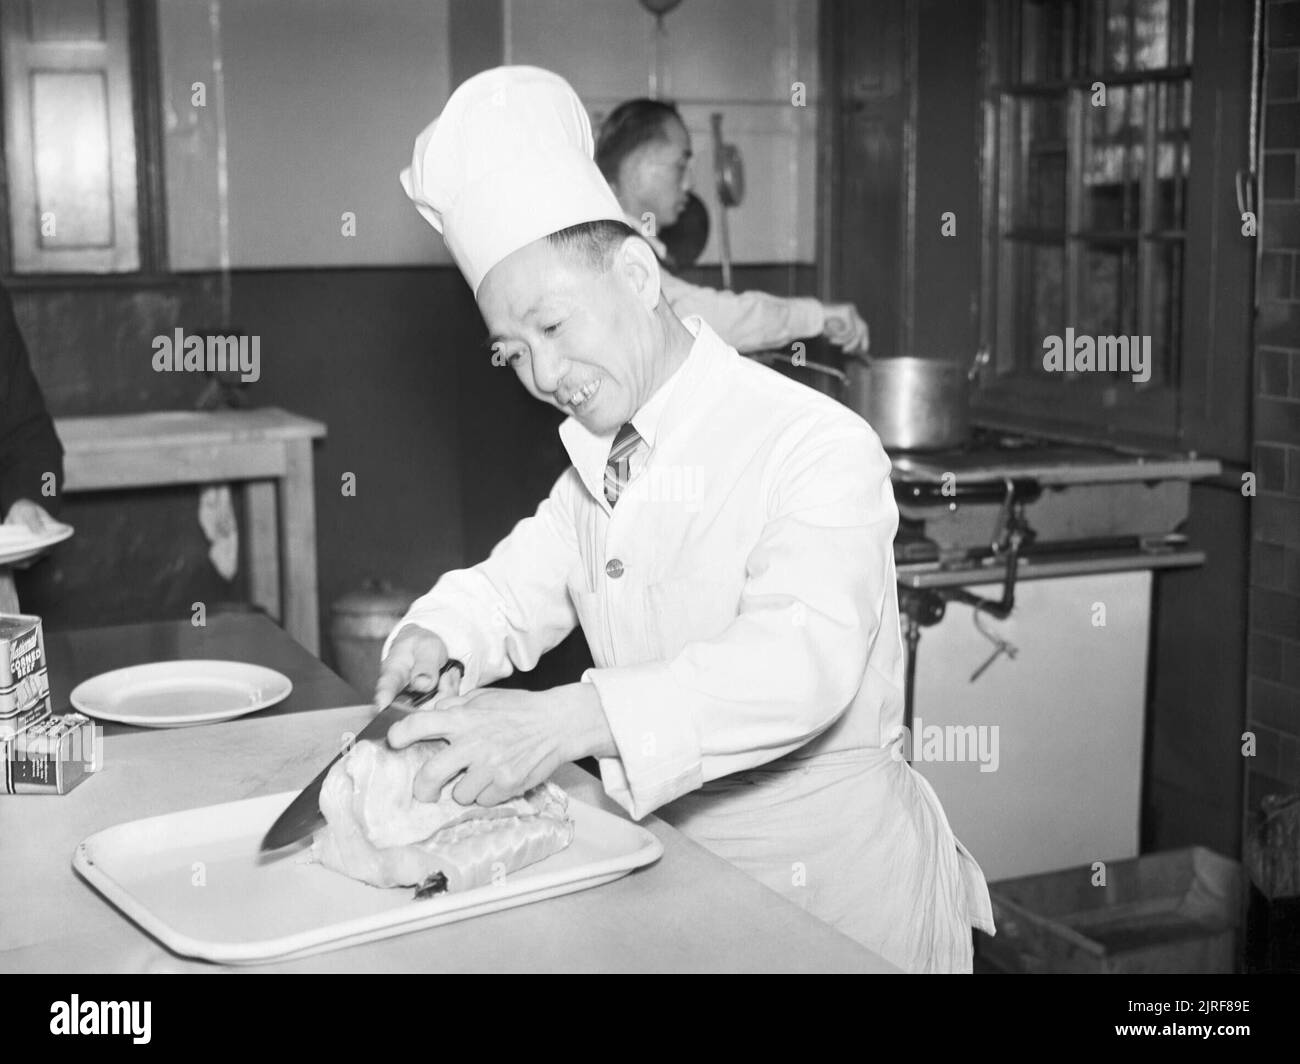 A Chinese merchant sailor, who served as chief cook, carves meat in the kitchen of the Chinese sailors' convalescent home in Liverpool, 1943. Ching Foo Po smiles as he carves meat in the kitchen of the Chinese convalescent home in Liverpool. According to the original caption, Ching Foo Po was a chief cook who came to the home after having suffered bad burns during a boiler explosion, but now cooks for the home as part of his convalescence. Stock Photo